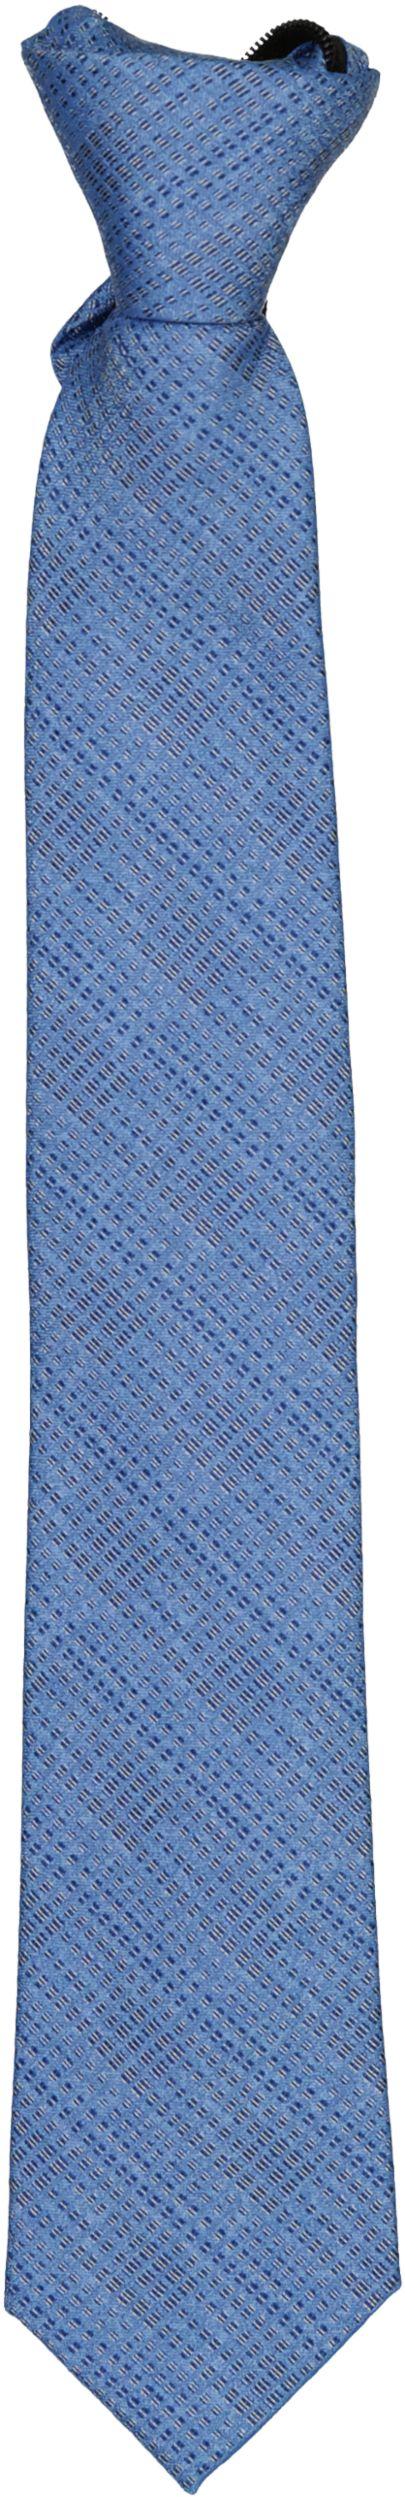 T.O. Collection Mens Necktie - TO267